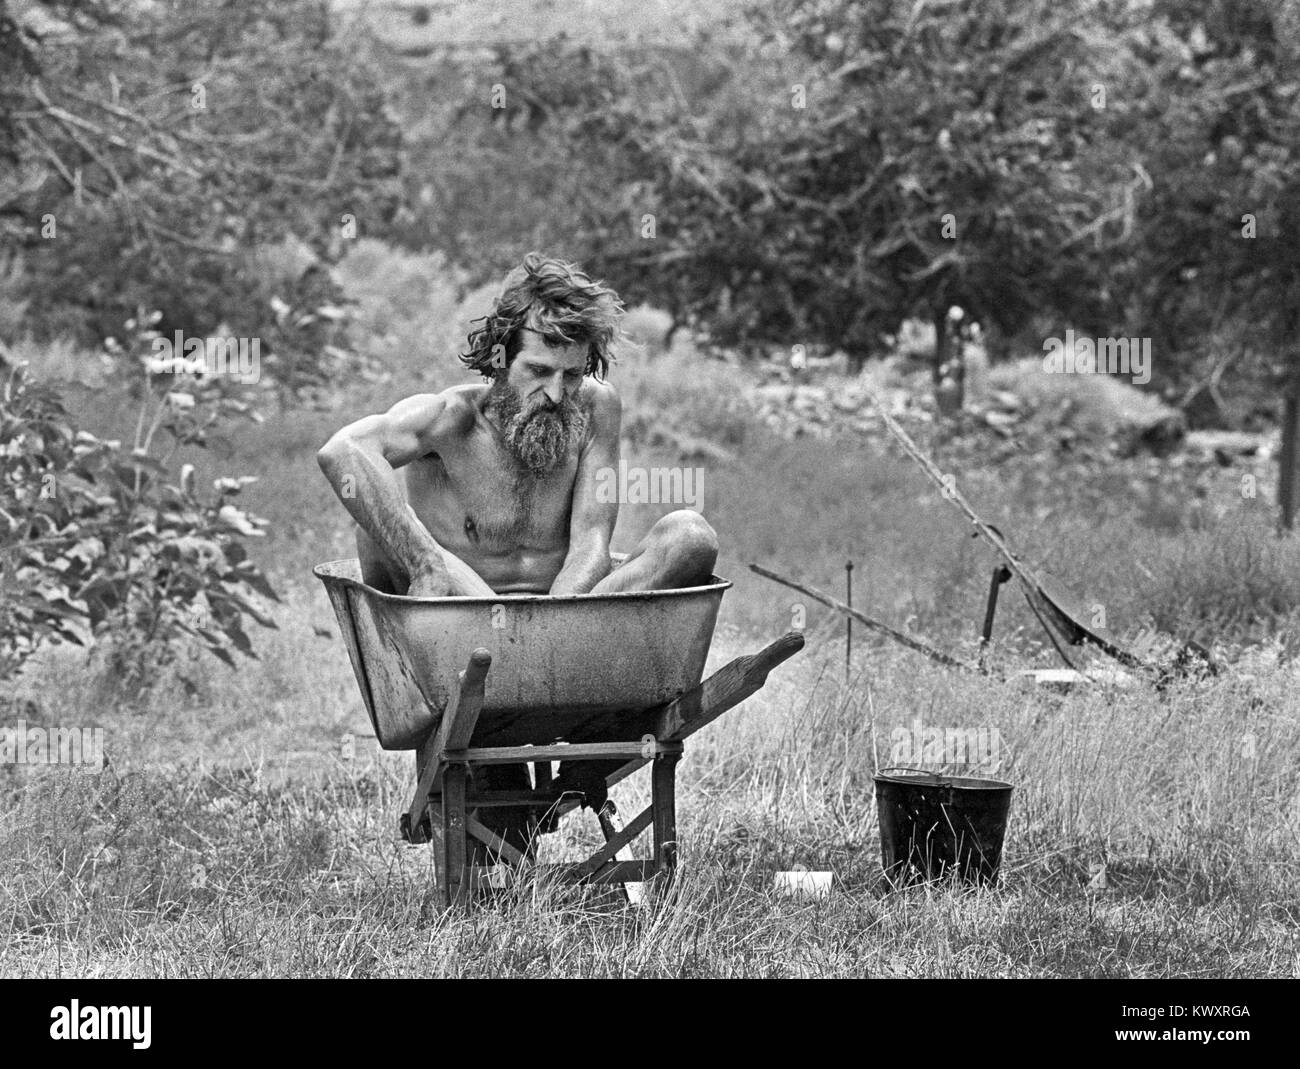 Nik Hougen, an American hermit, bathes in an old wheelbarrow, at his remote residence in Desolation Canyon, Utah, along the Green River. Stock Photo